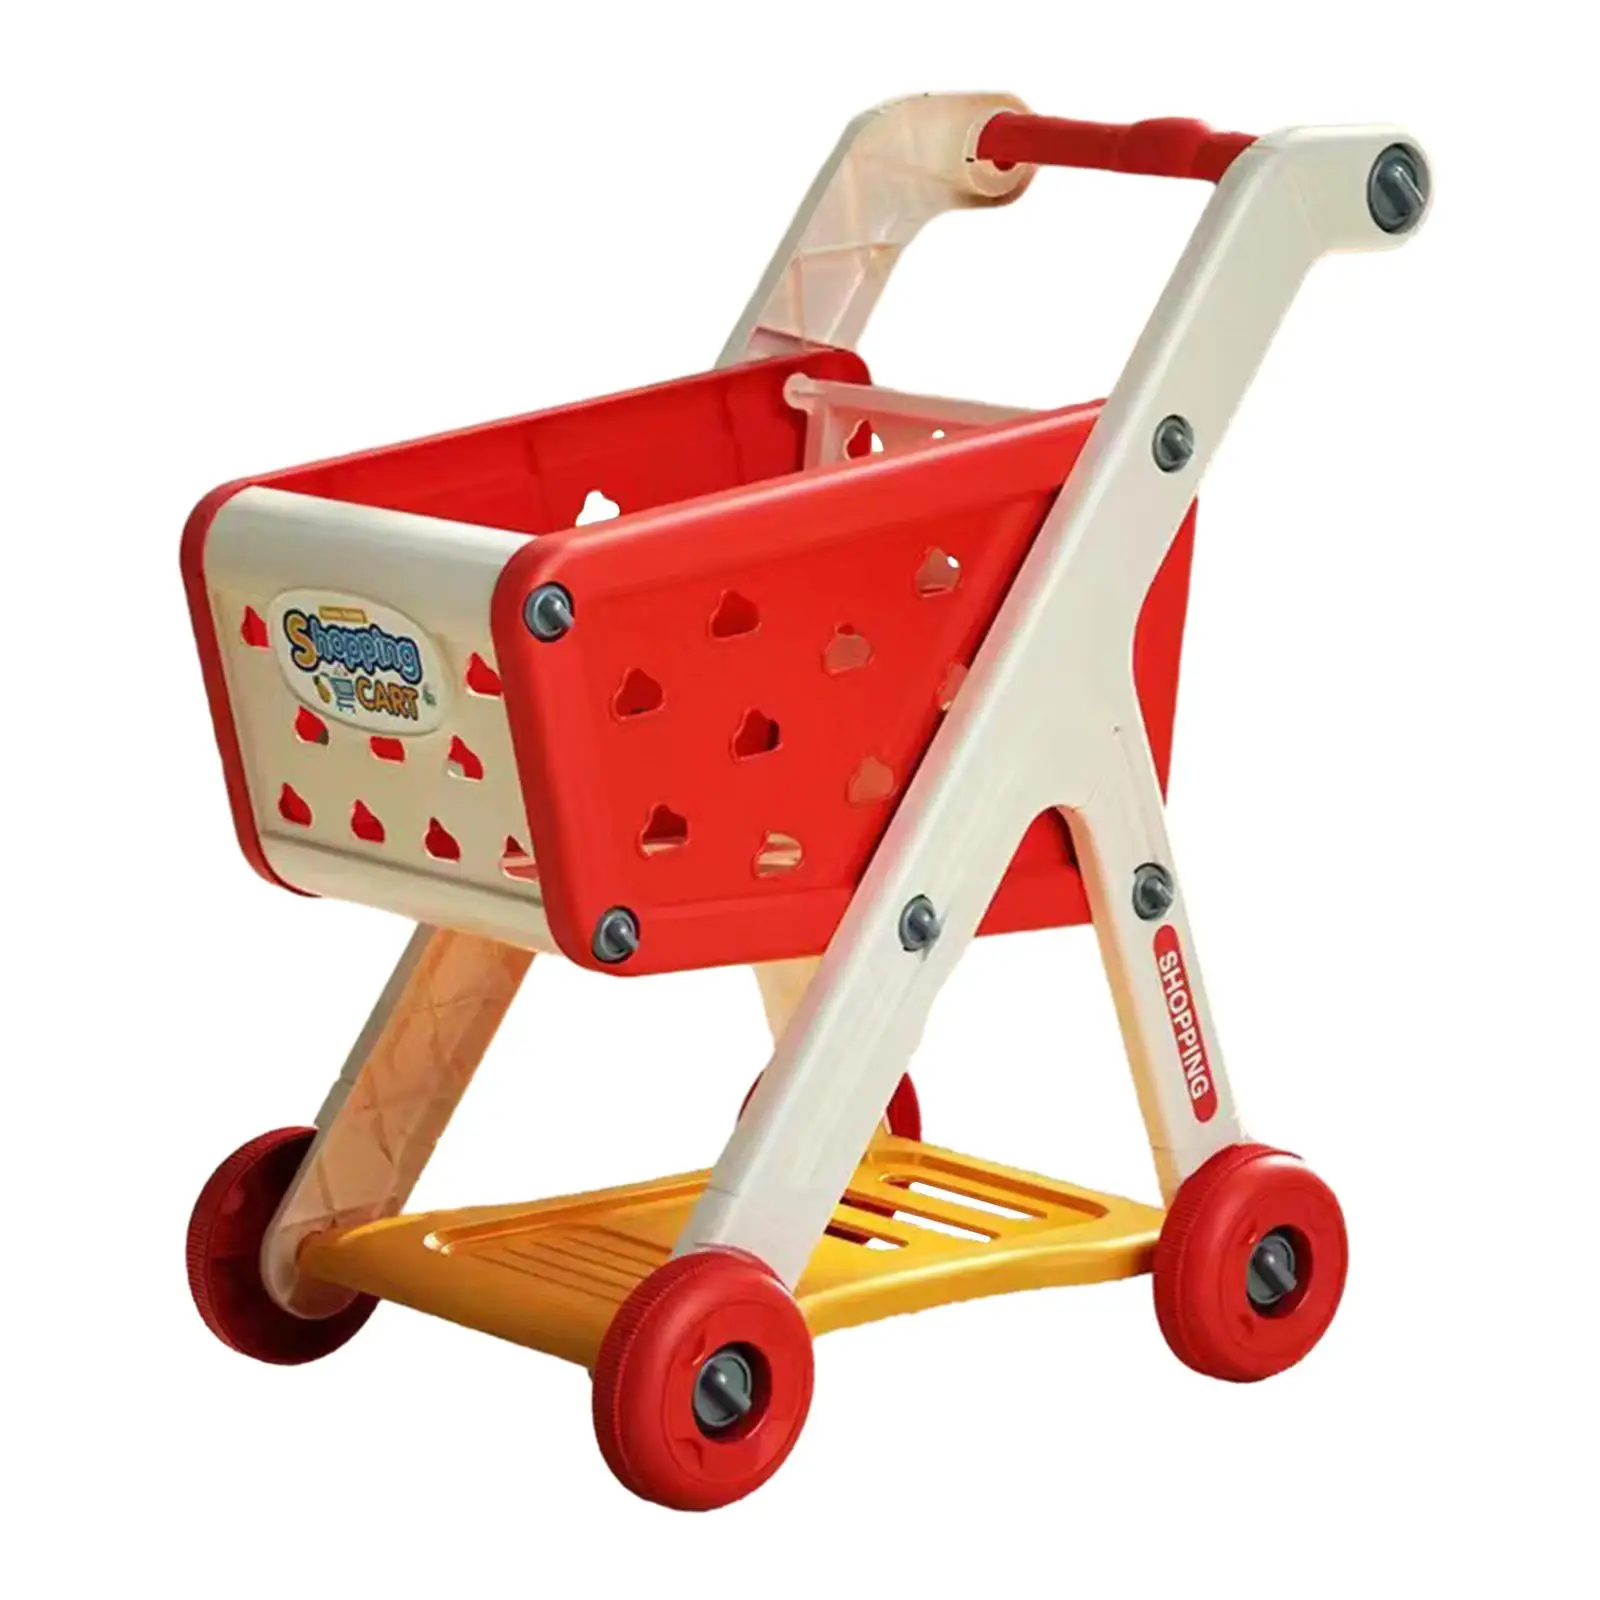 Mini Shopping Cart Toy Multifunctional Shopping Trolley Toy for Preschool Girls and Boys Ages 3 and up Birthday Gift